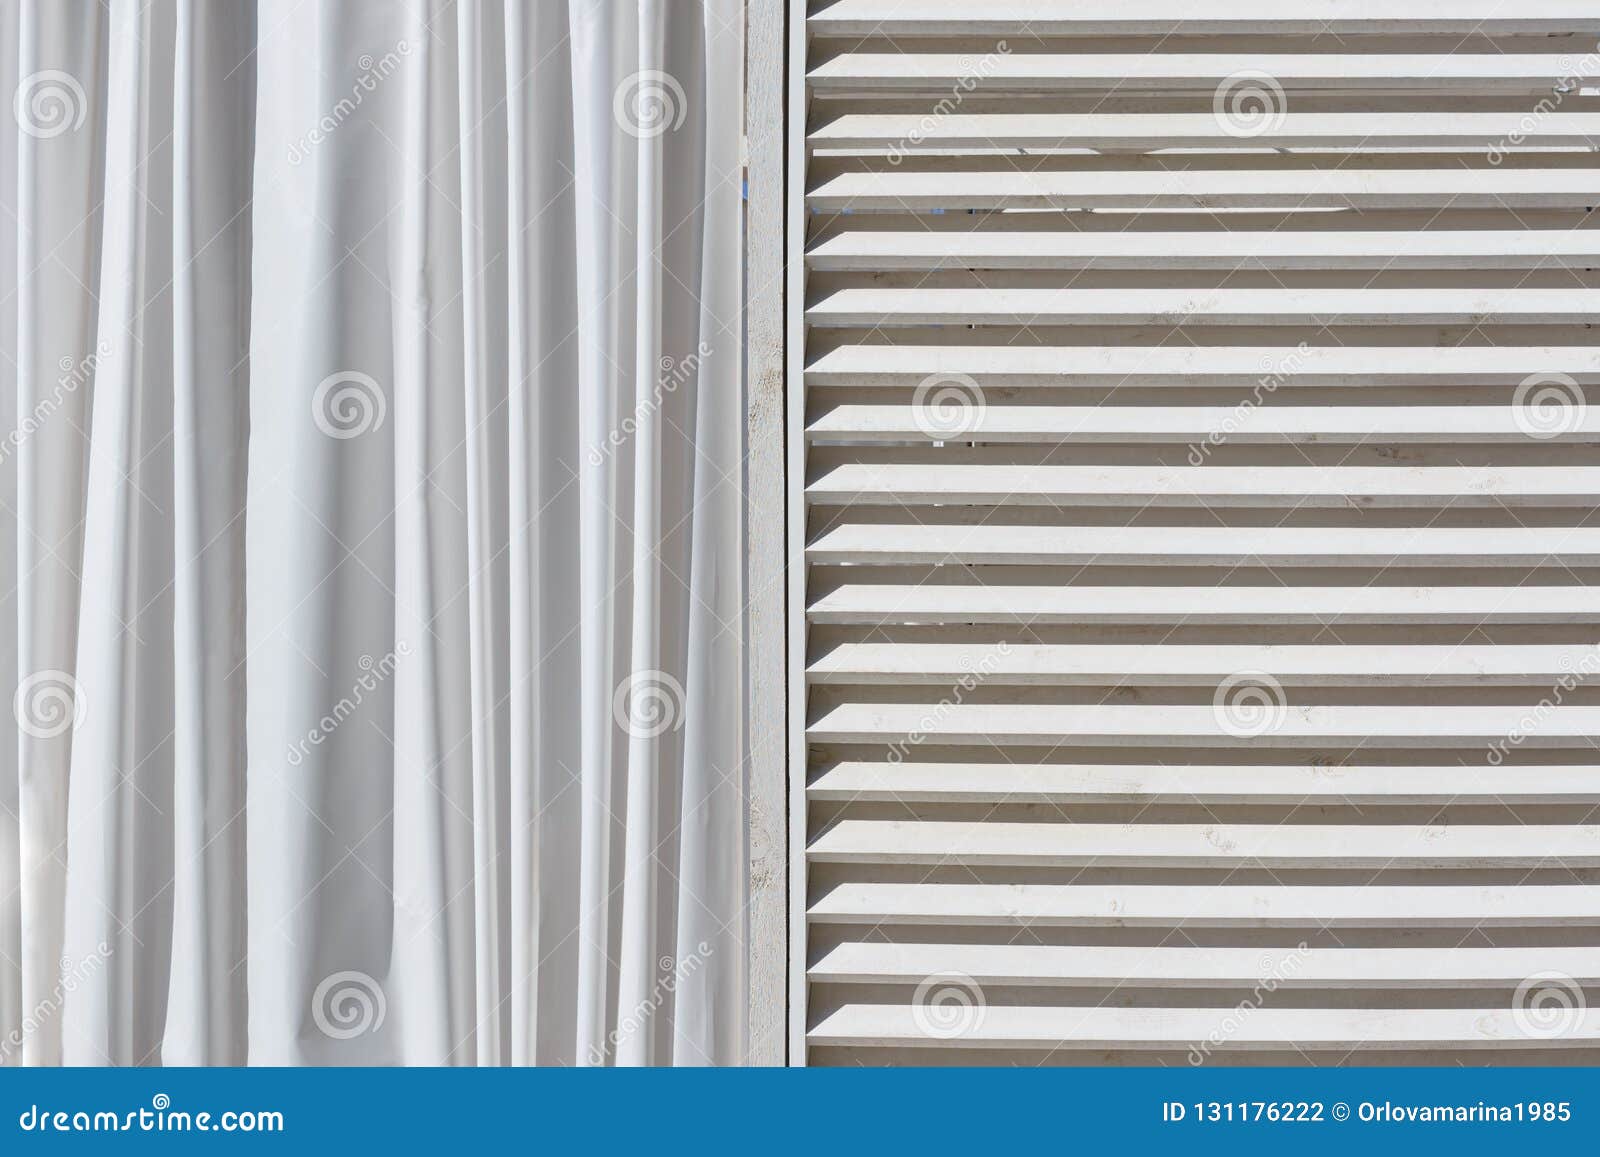 Curtain And Blinds Stock Photo Image Of Daylight Decor 131176222